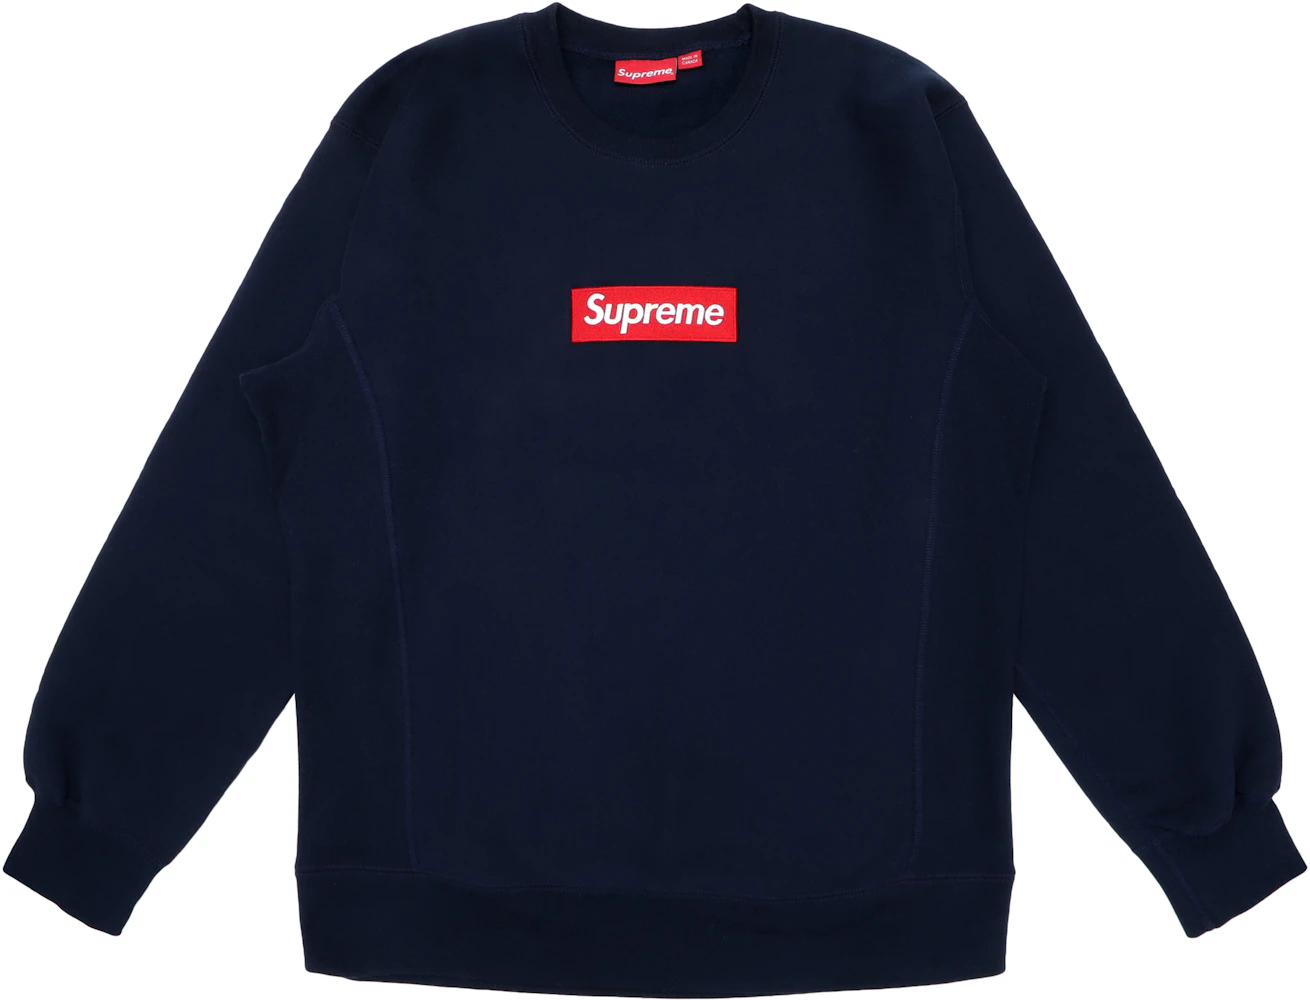 Supreme - Authenticated Box Logo Sweatshirt - Cotton Navy Plain for Men, Never Worn, with Tag